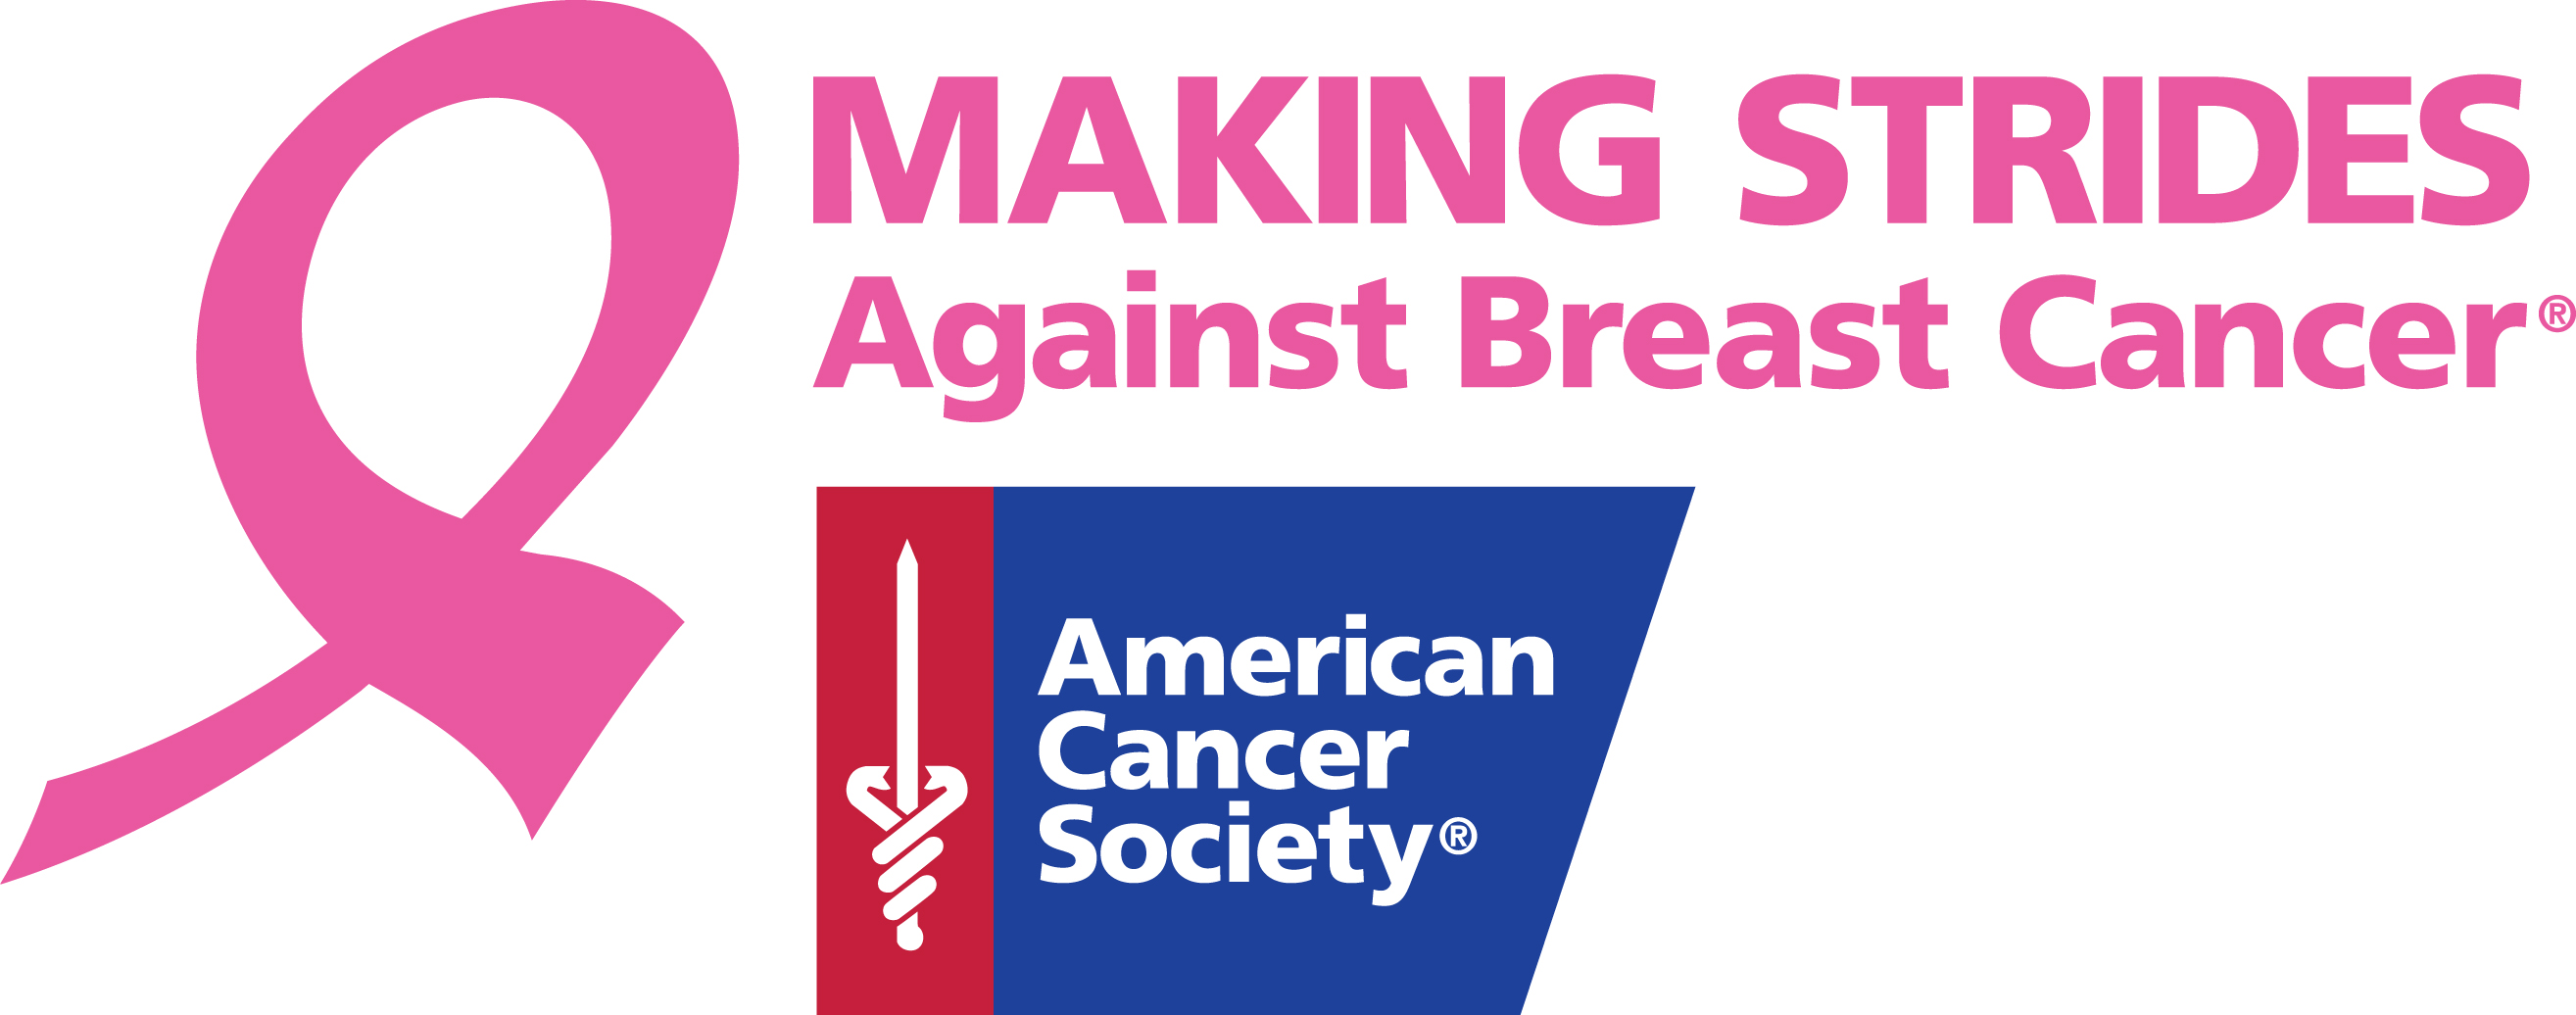 Making Strides Against Breast Cancer, American Cancer Society